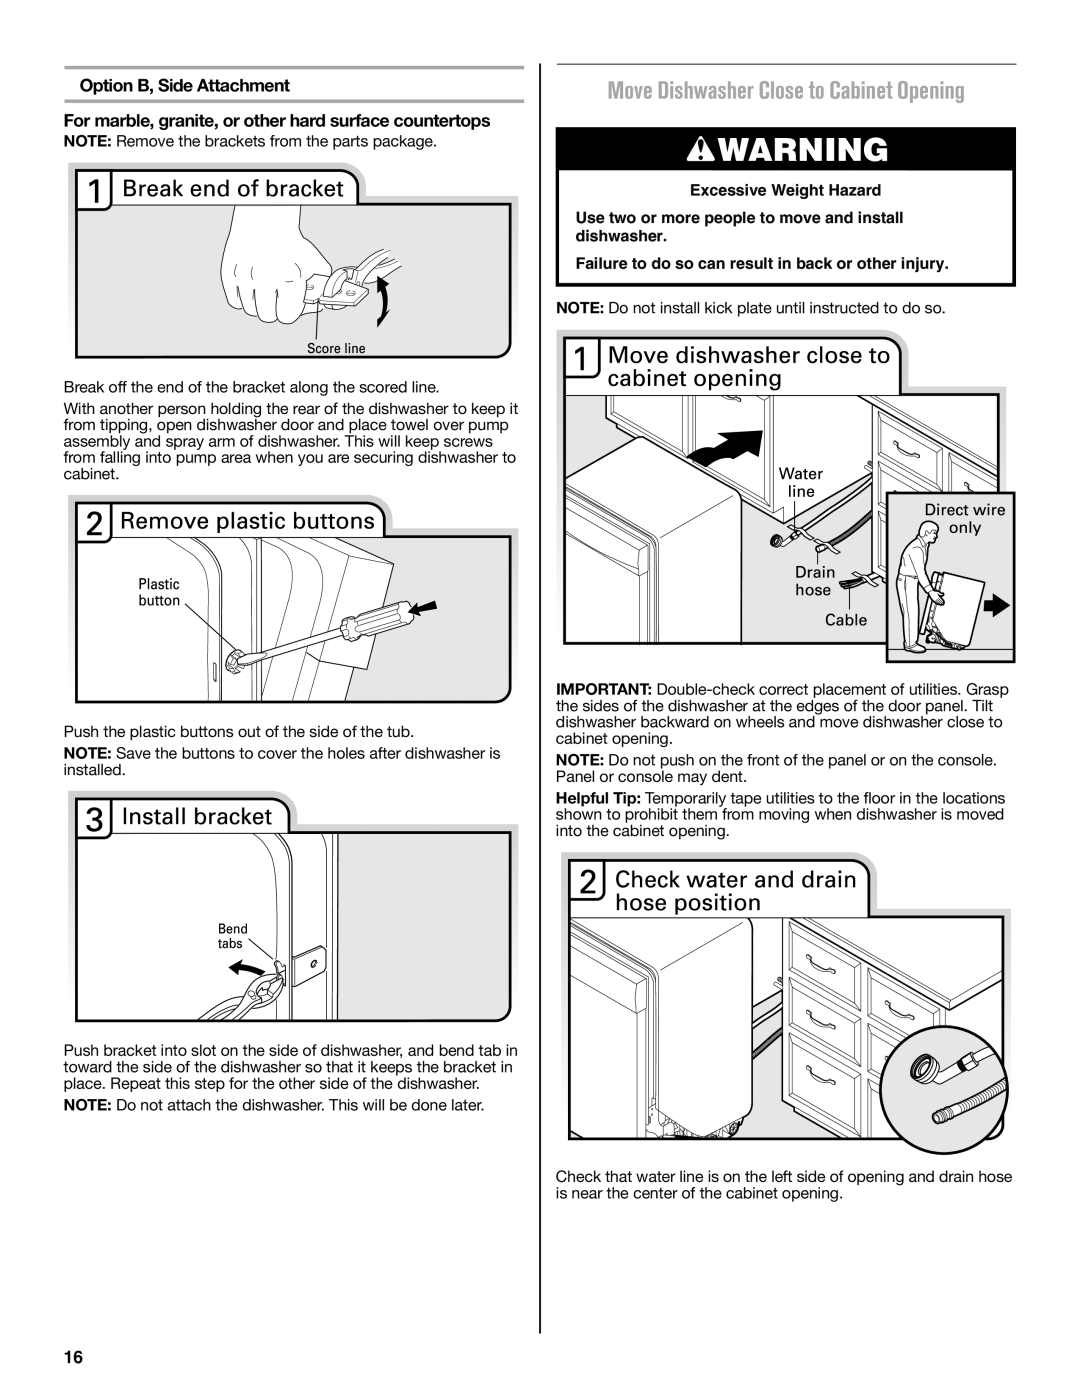 Maytag W10649077A installation instructions Move Dishwasher Close to Cabinet Opening, Option B, Side Attachment 